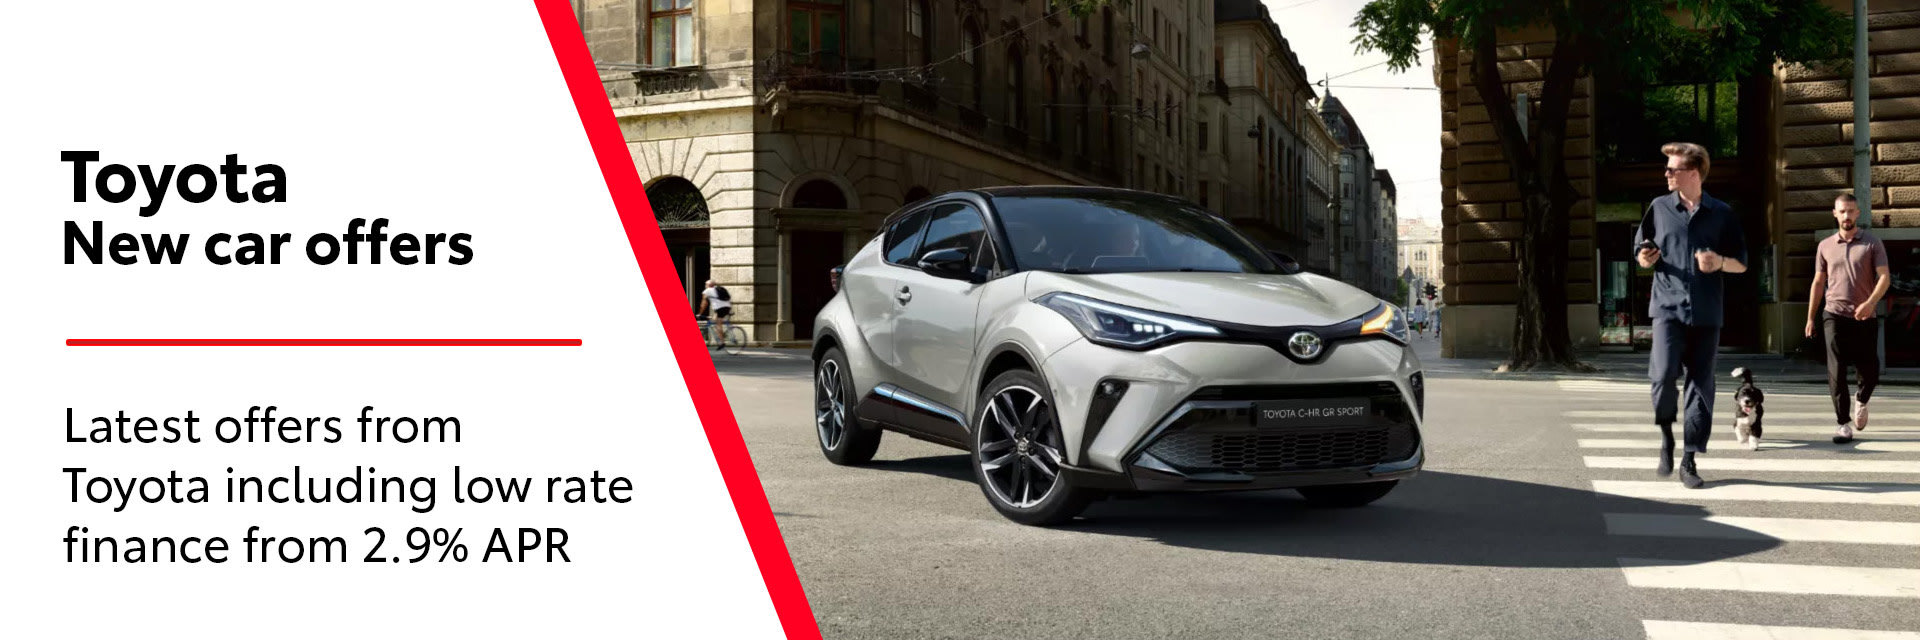 Toyota New Car offers from RRG Toyota